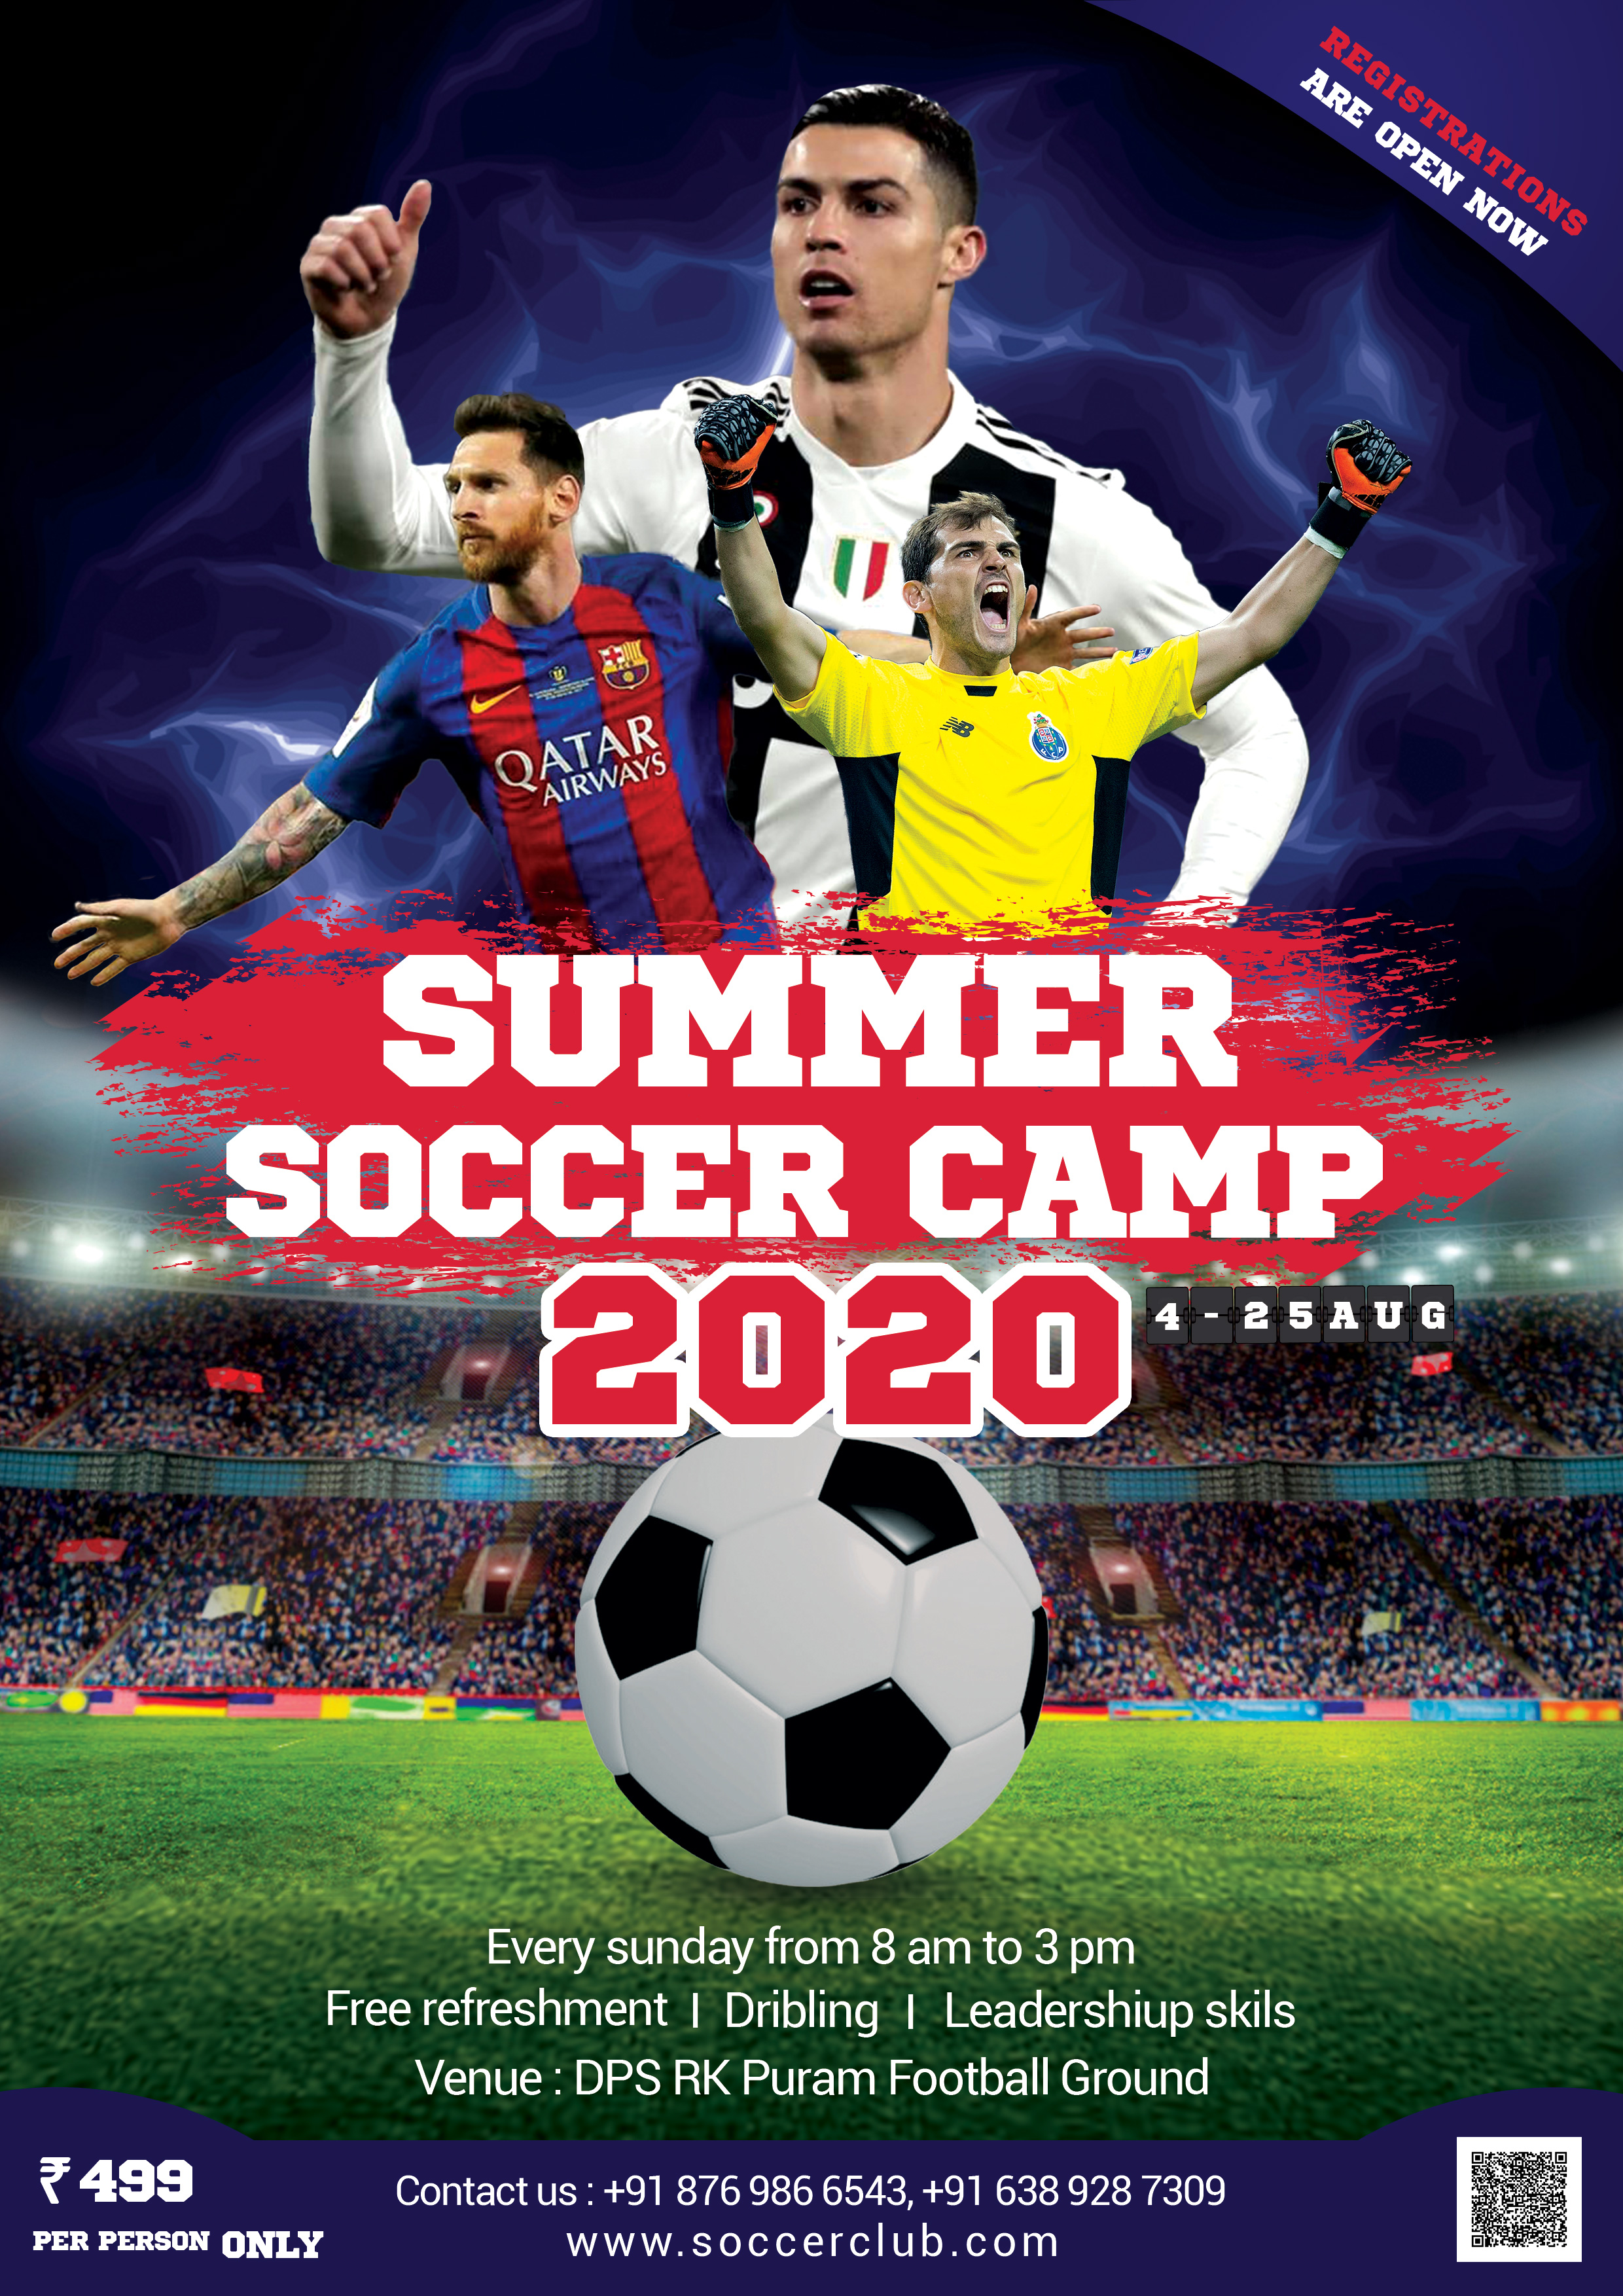 Summer Soccer Camp Flyer Free PSD  FreedownloadPSD.com Intended For Football Camp Flyer Template Free